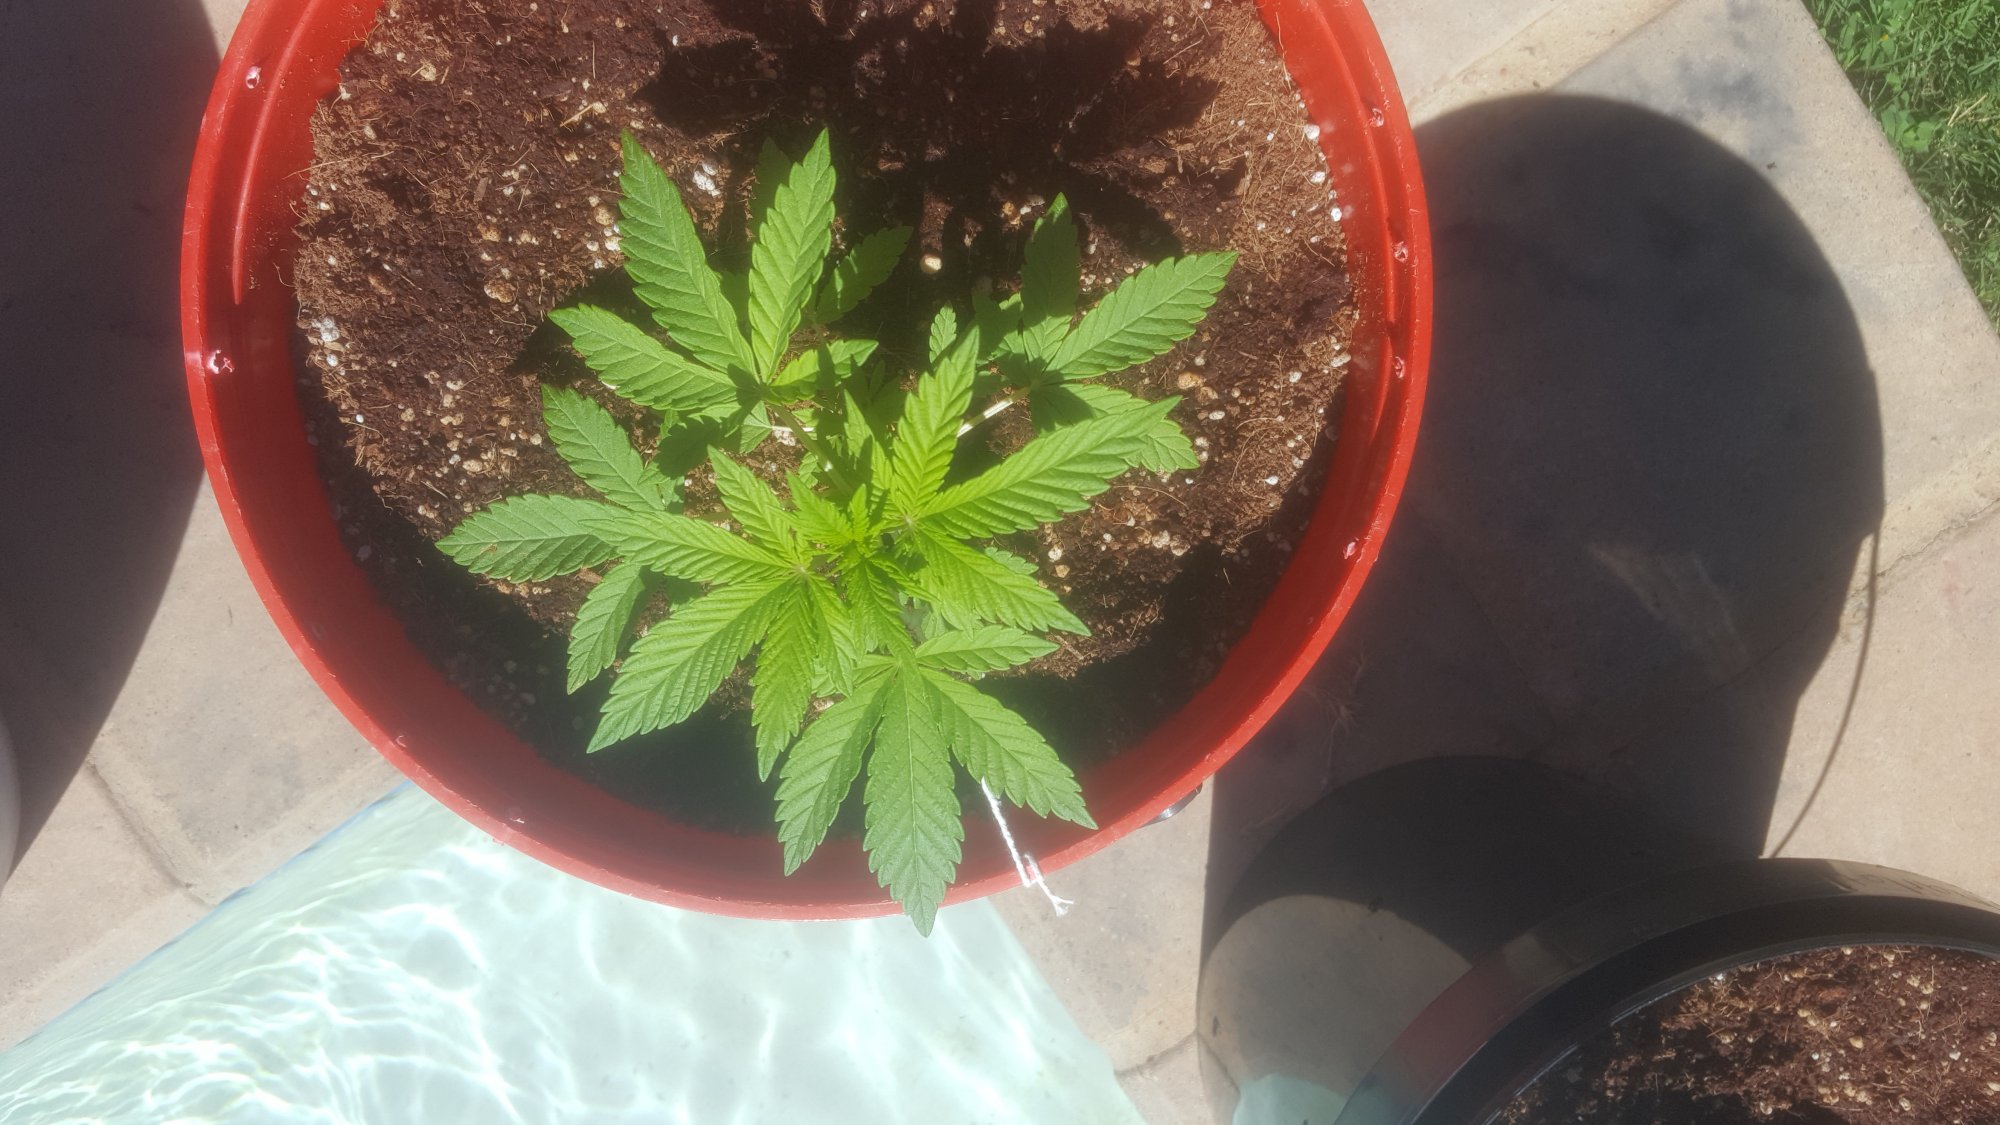 My current grows 4 weeks old 6